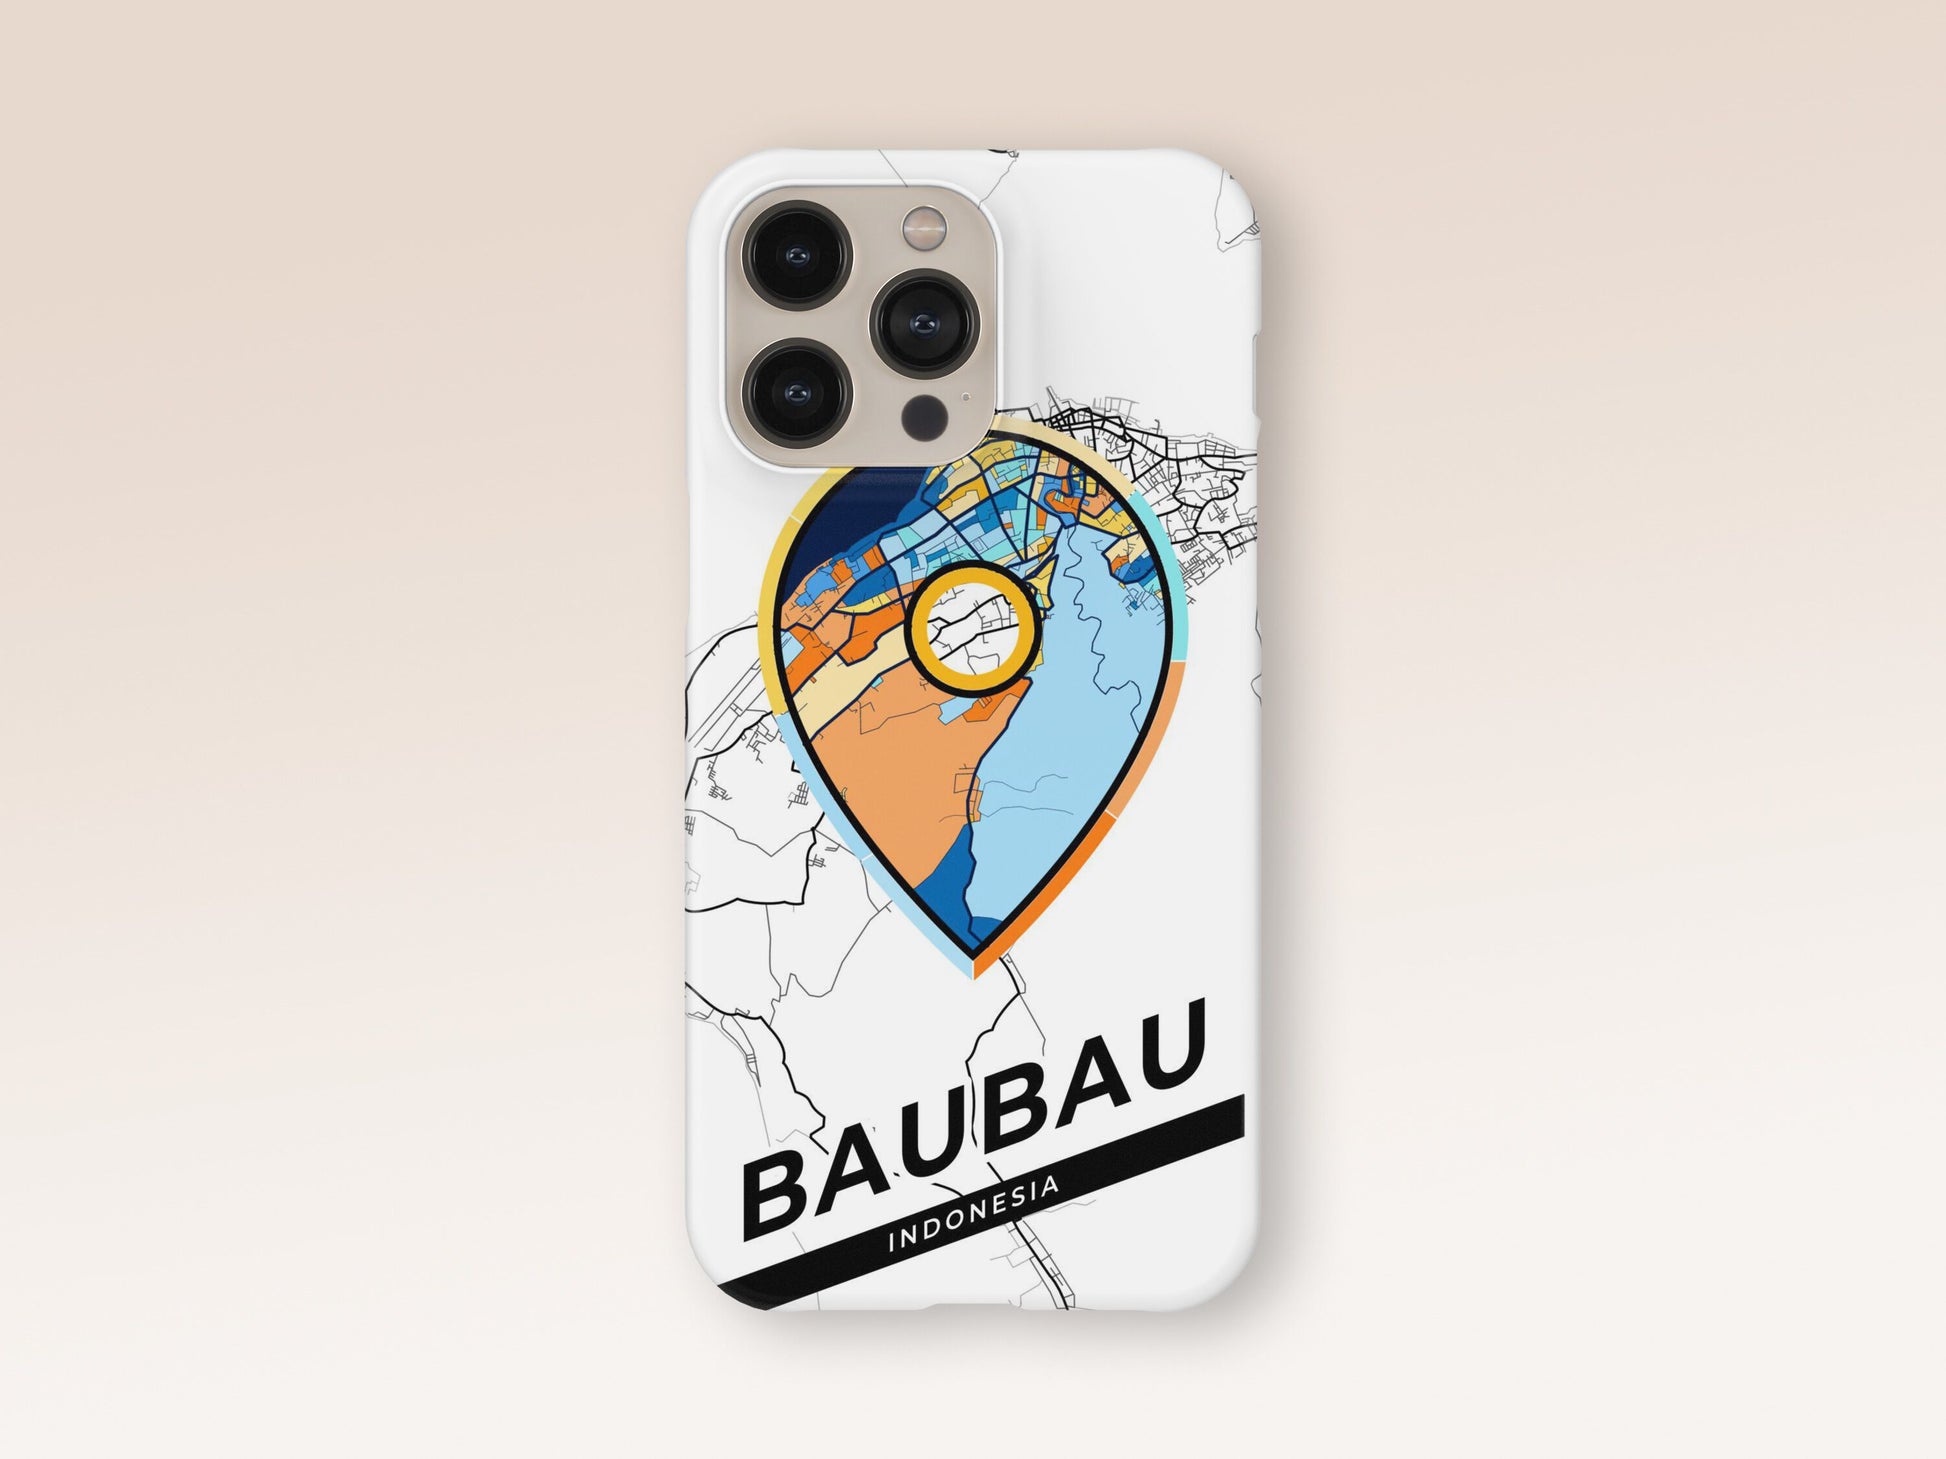 Baubau Indonesia slim phone case with colorful icon. Birthday, wedding or housewarming gift. Couple match cases. 1